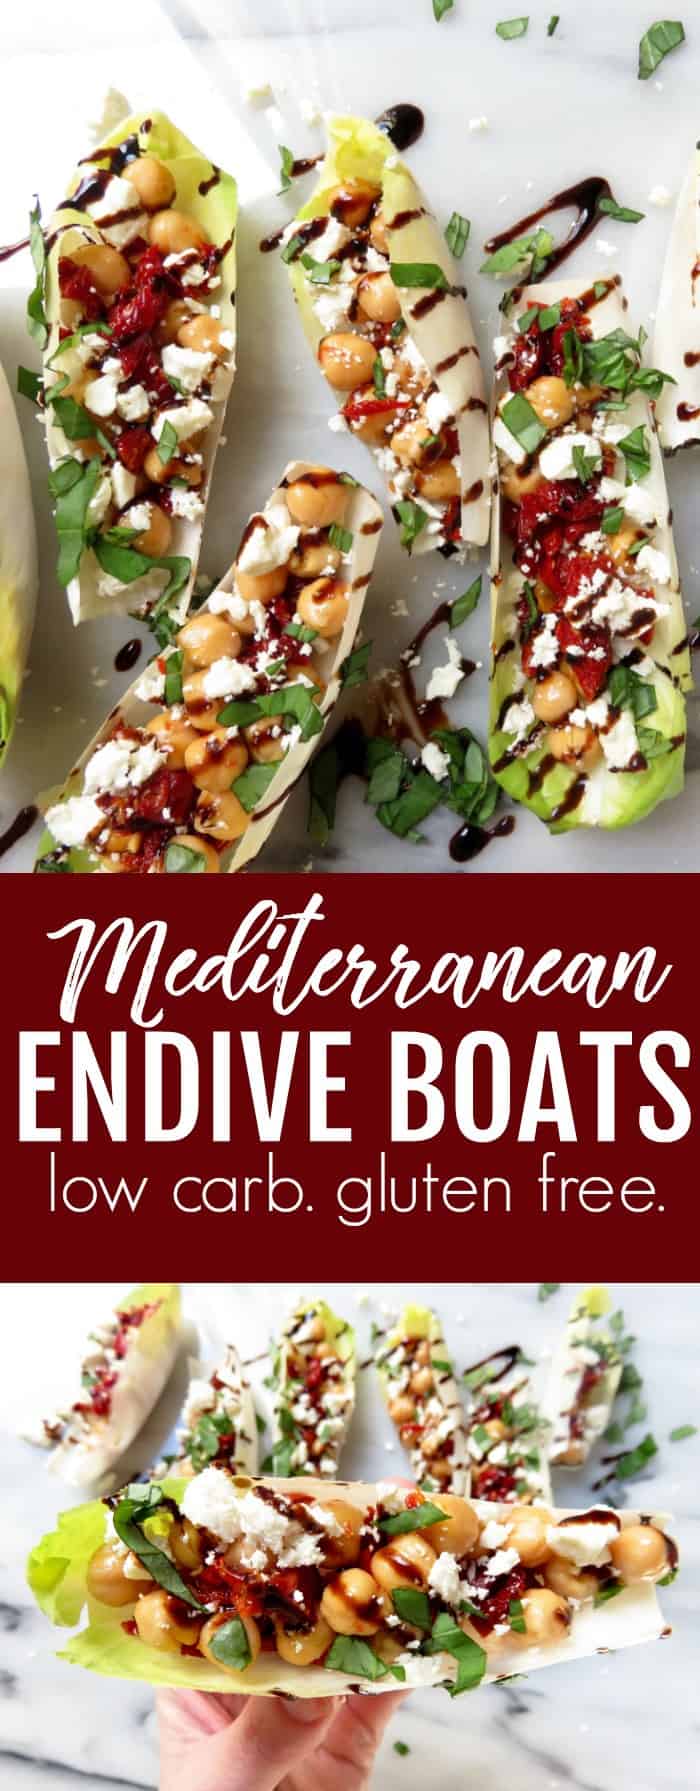 If you're looking for an light and fun appetizer, these low carb + gluten free Mediterranean Endive Boats are so delicious and flavorful! thetoastedpinenut.com